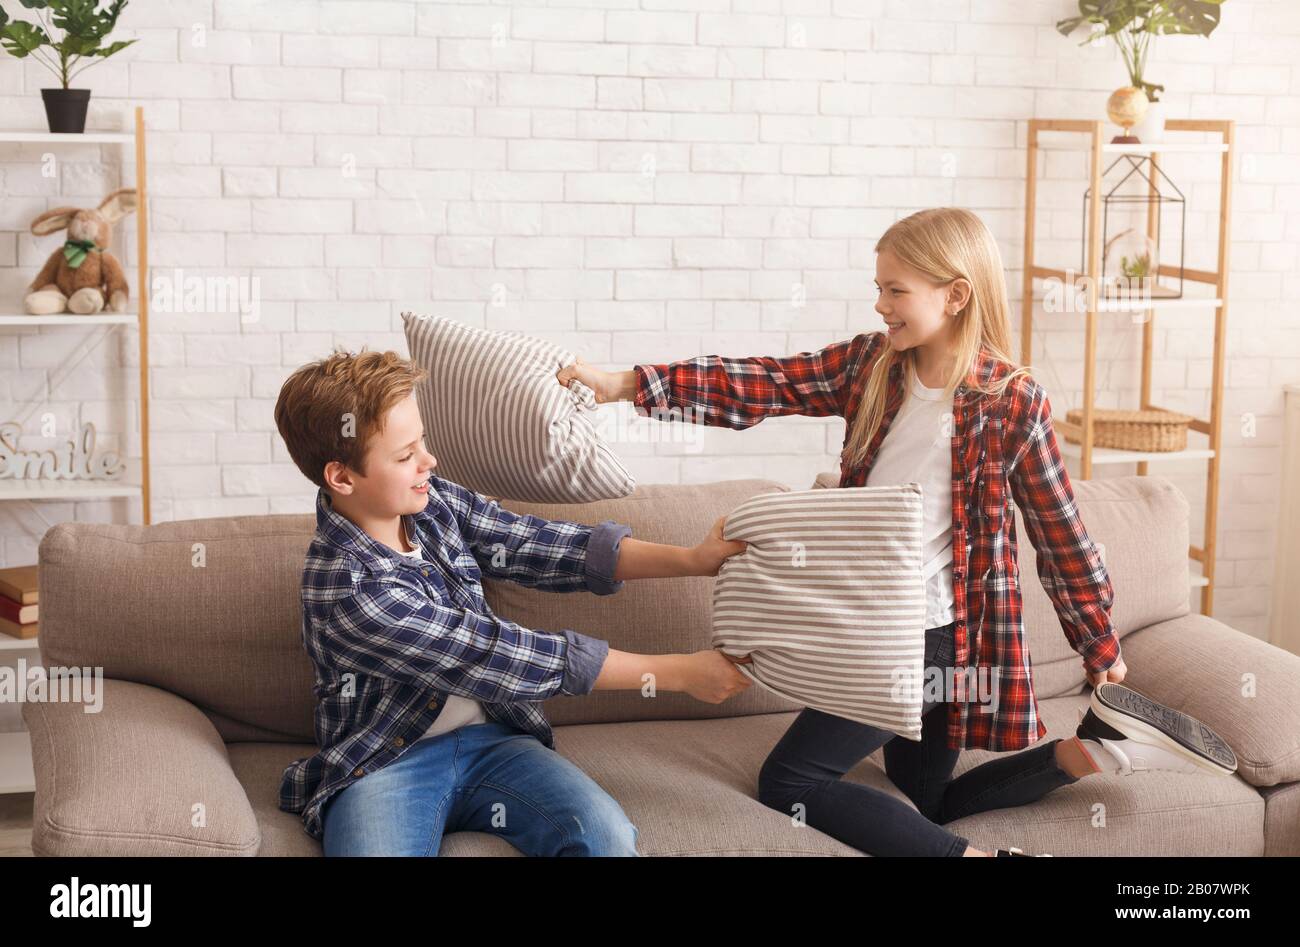 Sibling Having Fun Fighting With Pillows On Couch Indoor Stock Photo